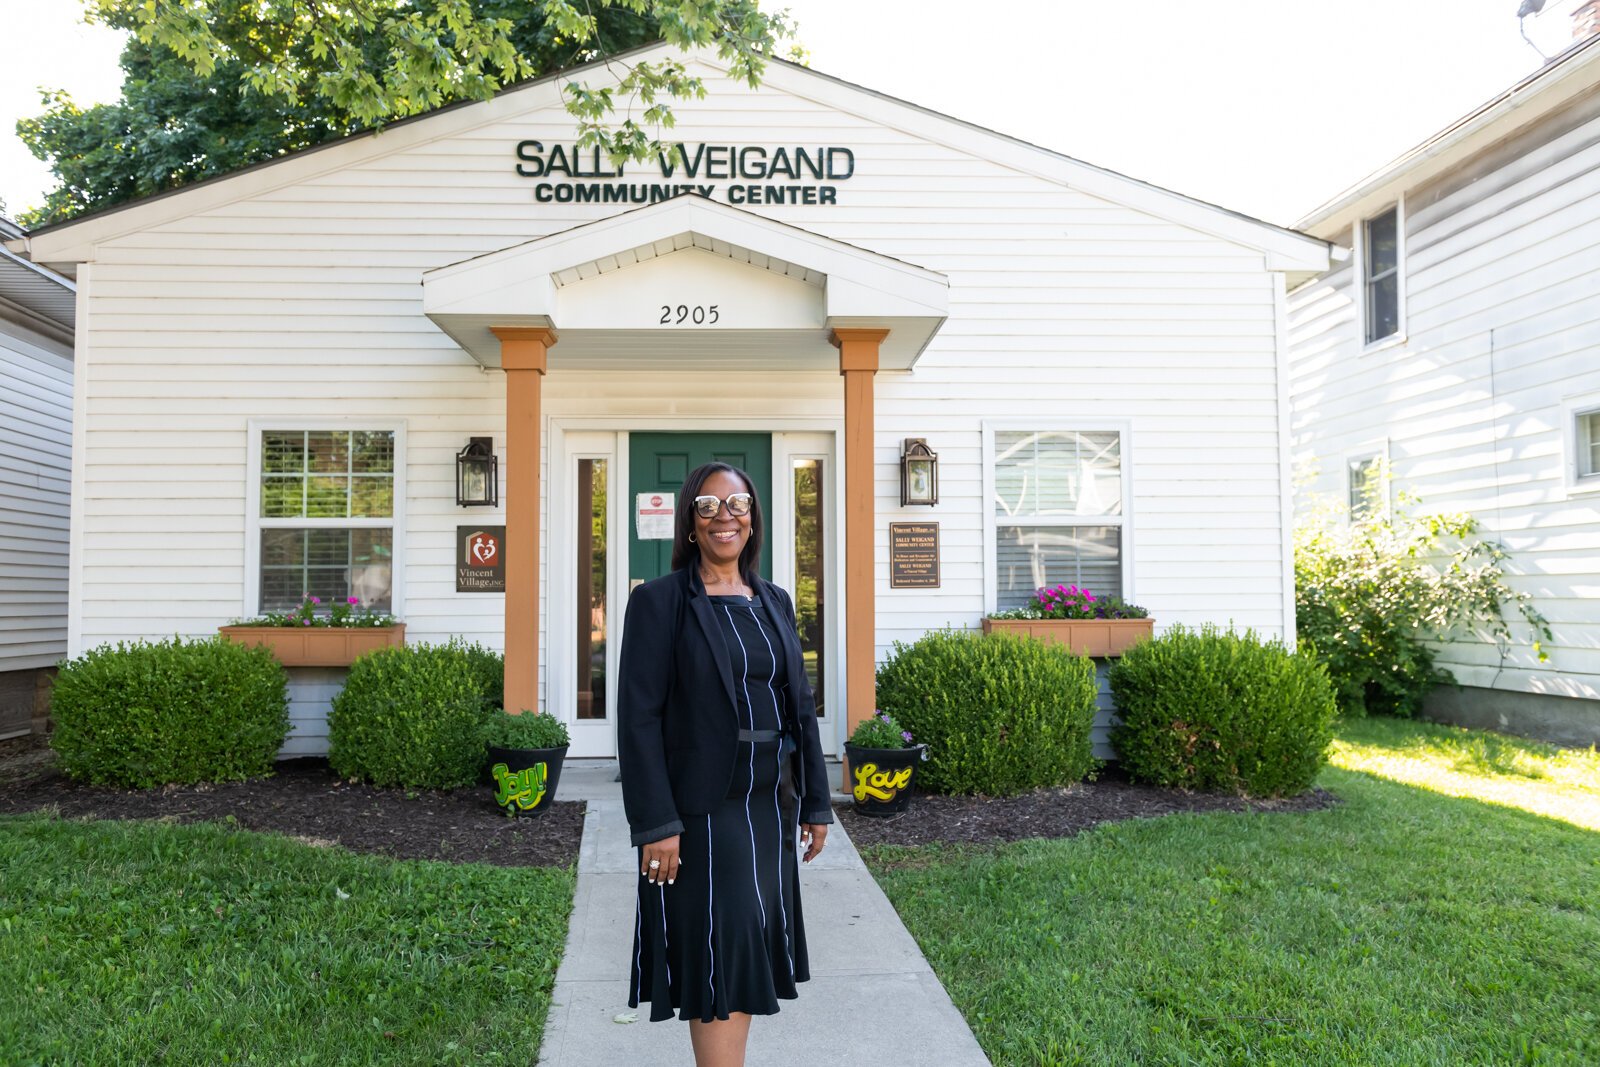 Sharon Tucker, Executive Director of Vincent Village, in front of the Sally Weigand Community Center.